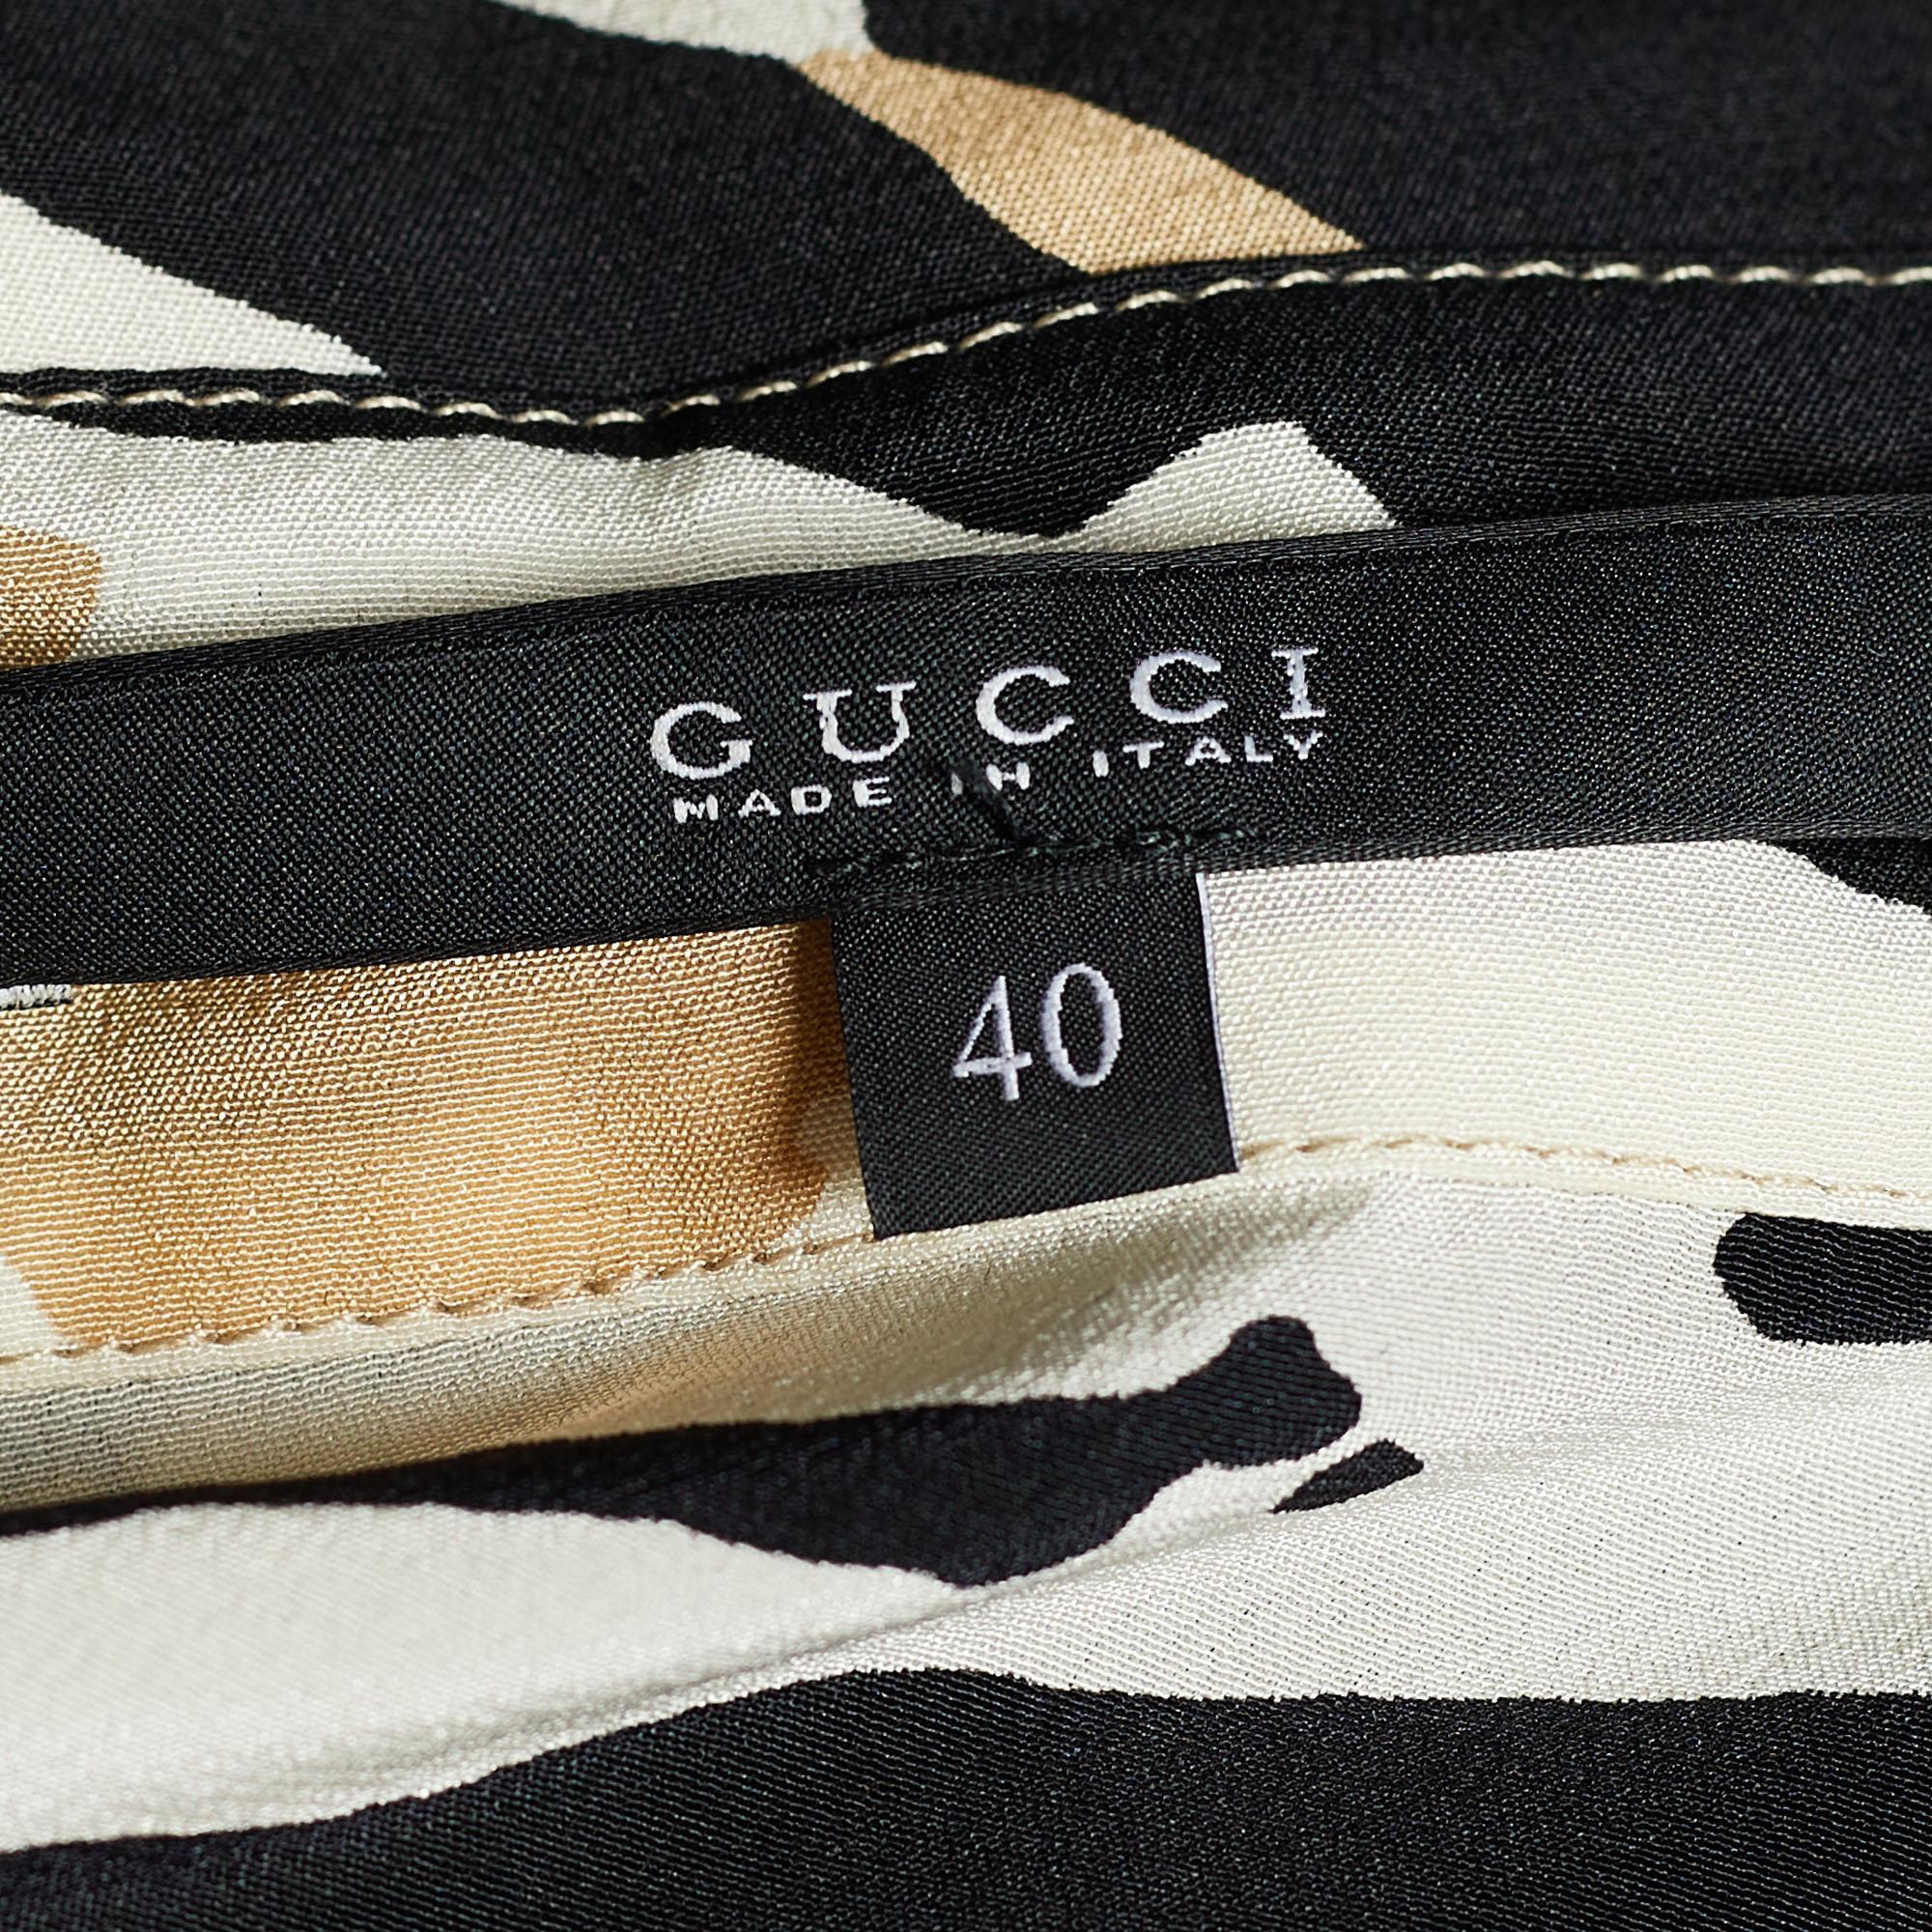 Women's Gucci White and Black Printed Silk Top S